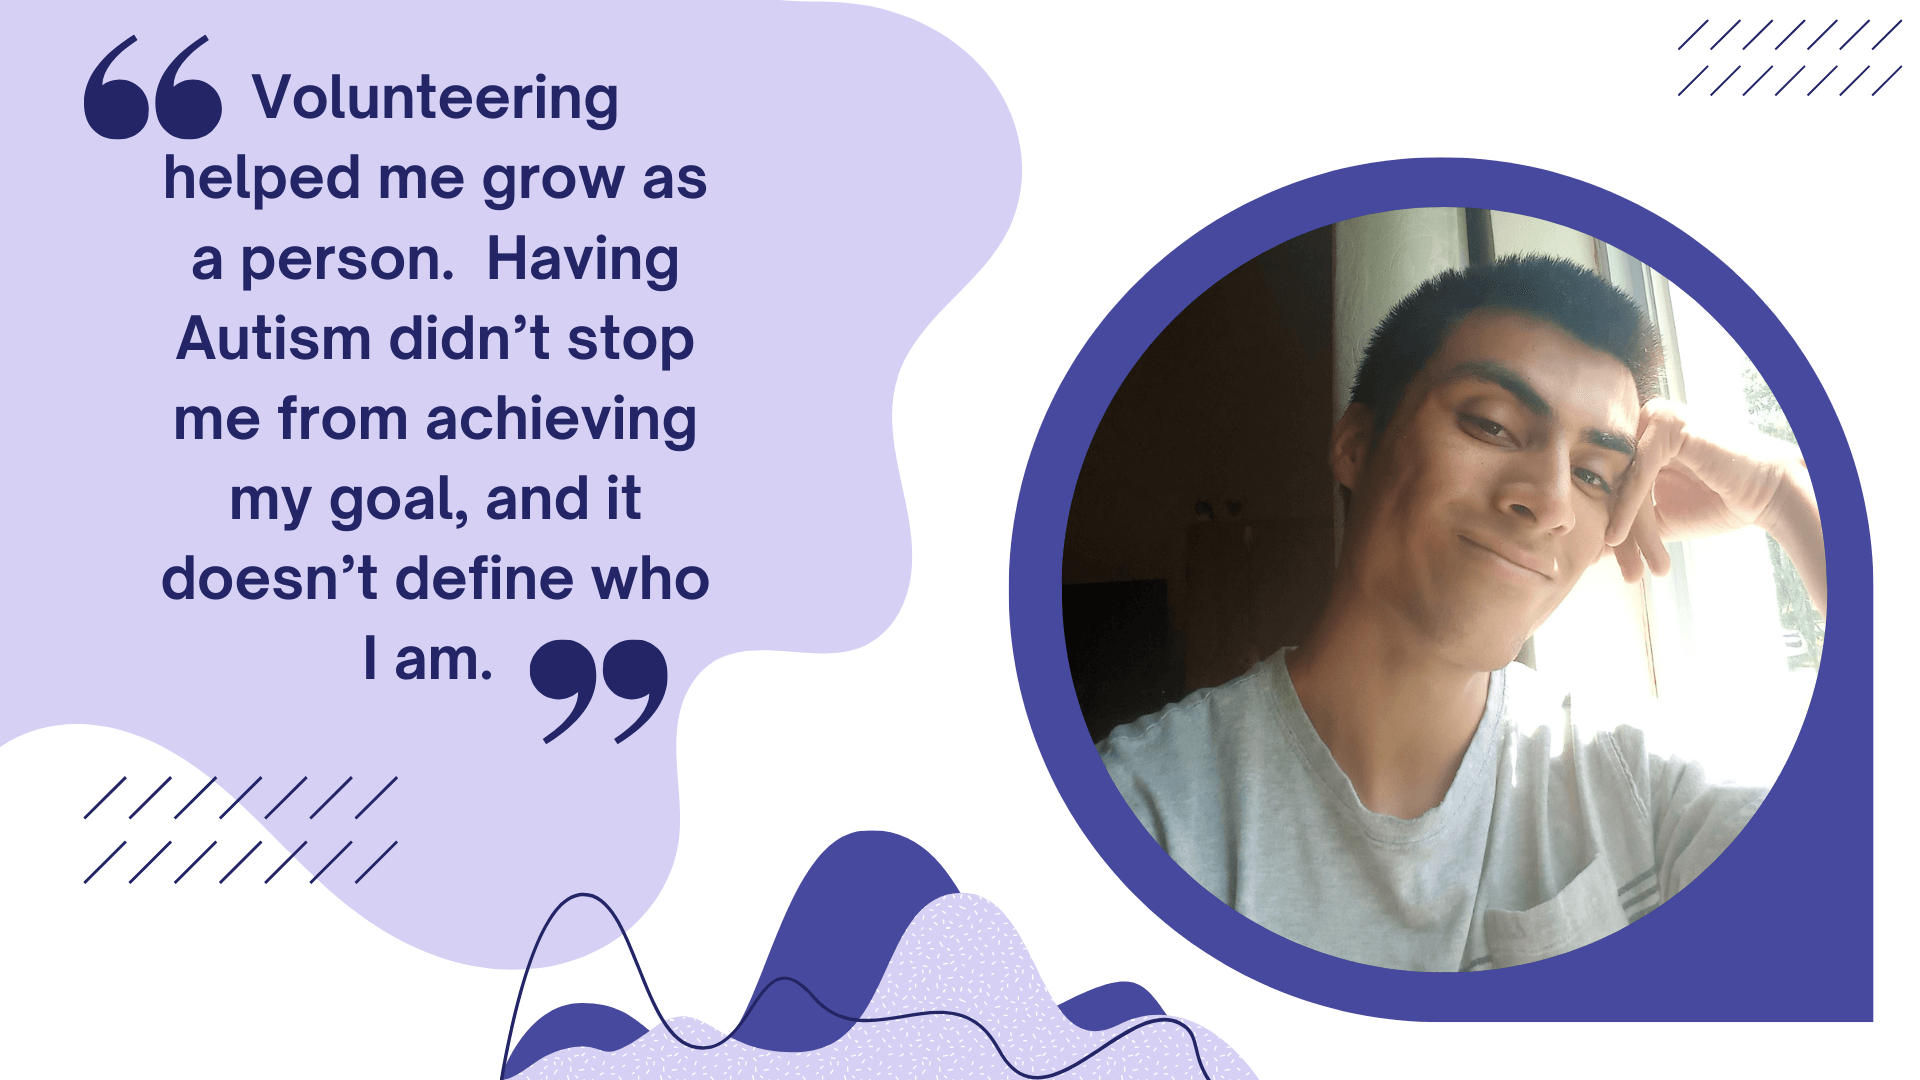 A graphic that reads: "Volunteering helped me grow as a person. Having Autism didn’t stop me from achieving my goal, and it doesn’t define who I am."